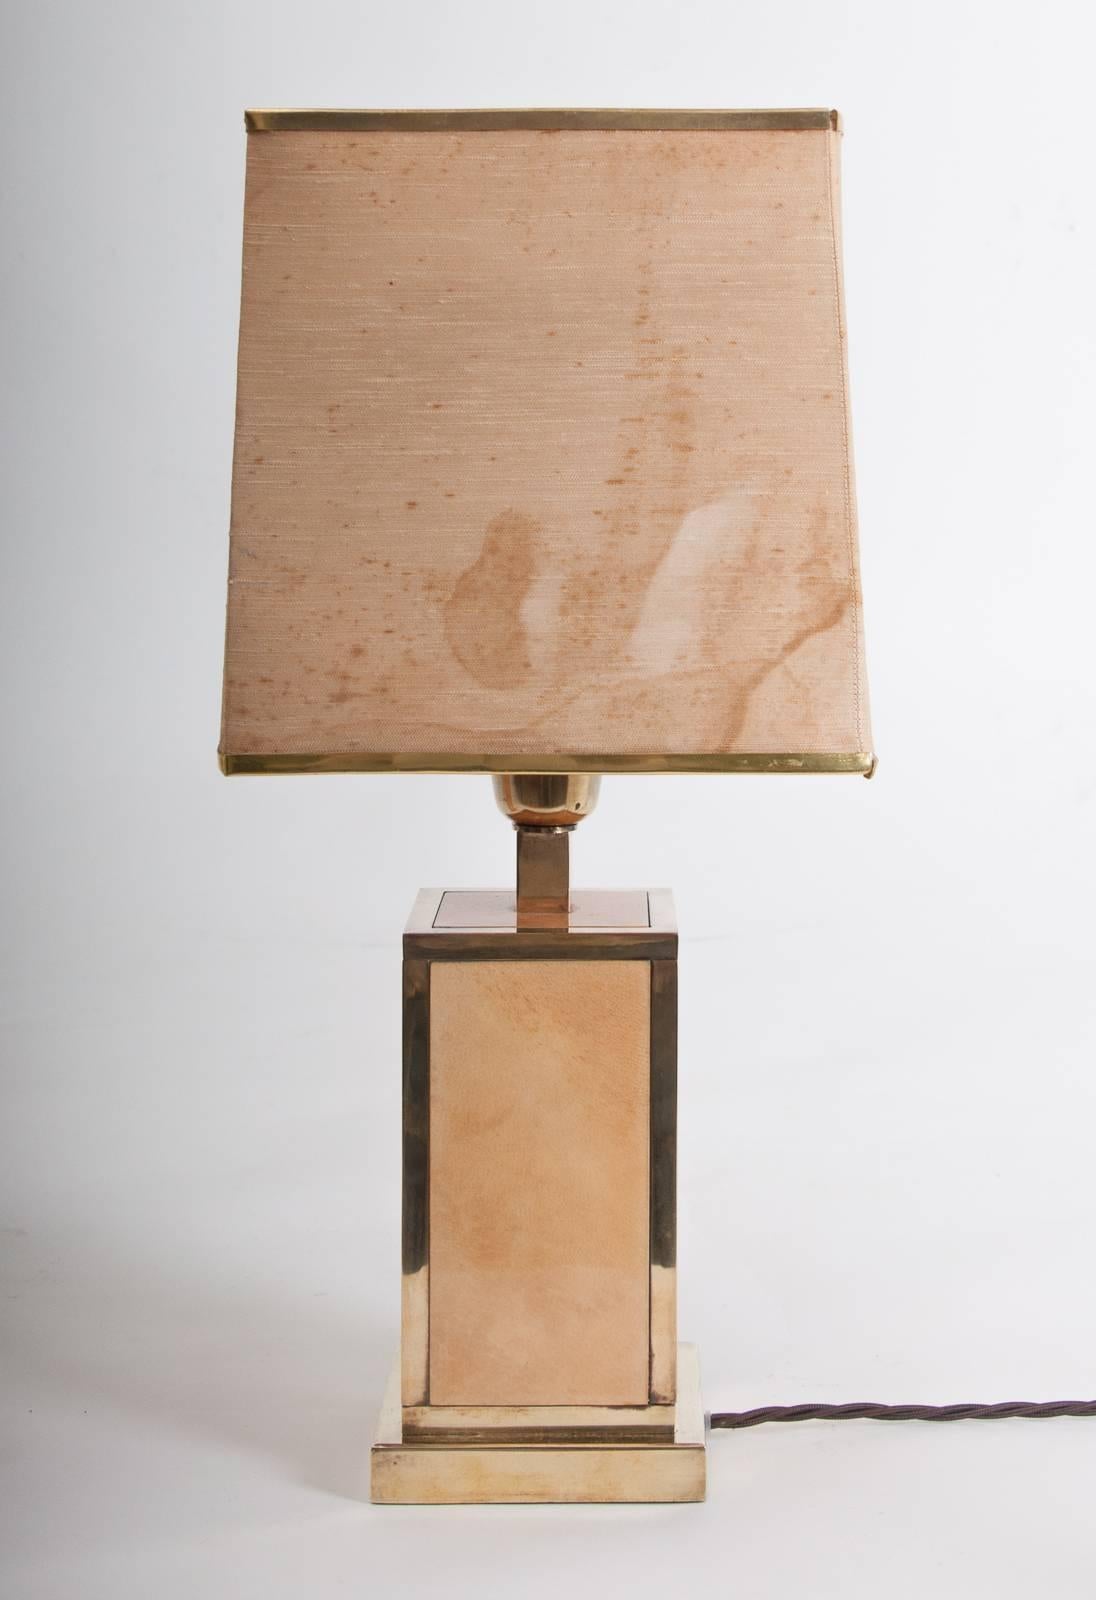 20th Century Rare Pair of Mid-Century Aldo Tura Lacquered Parchment and Brass Table Lamps